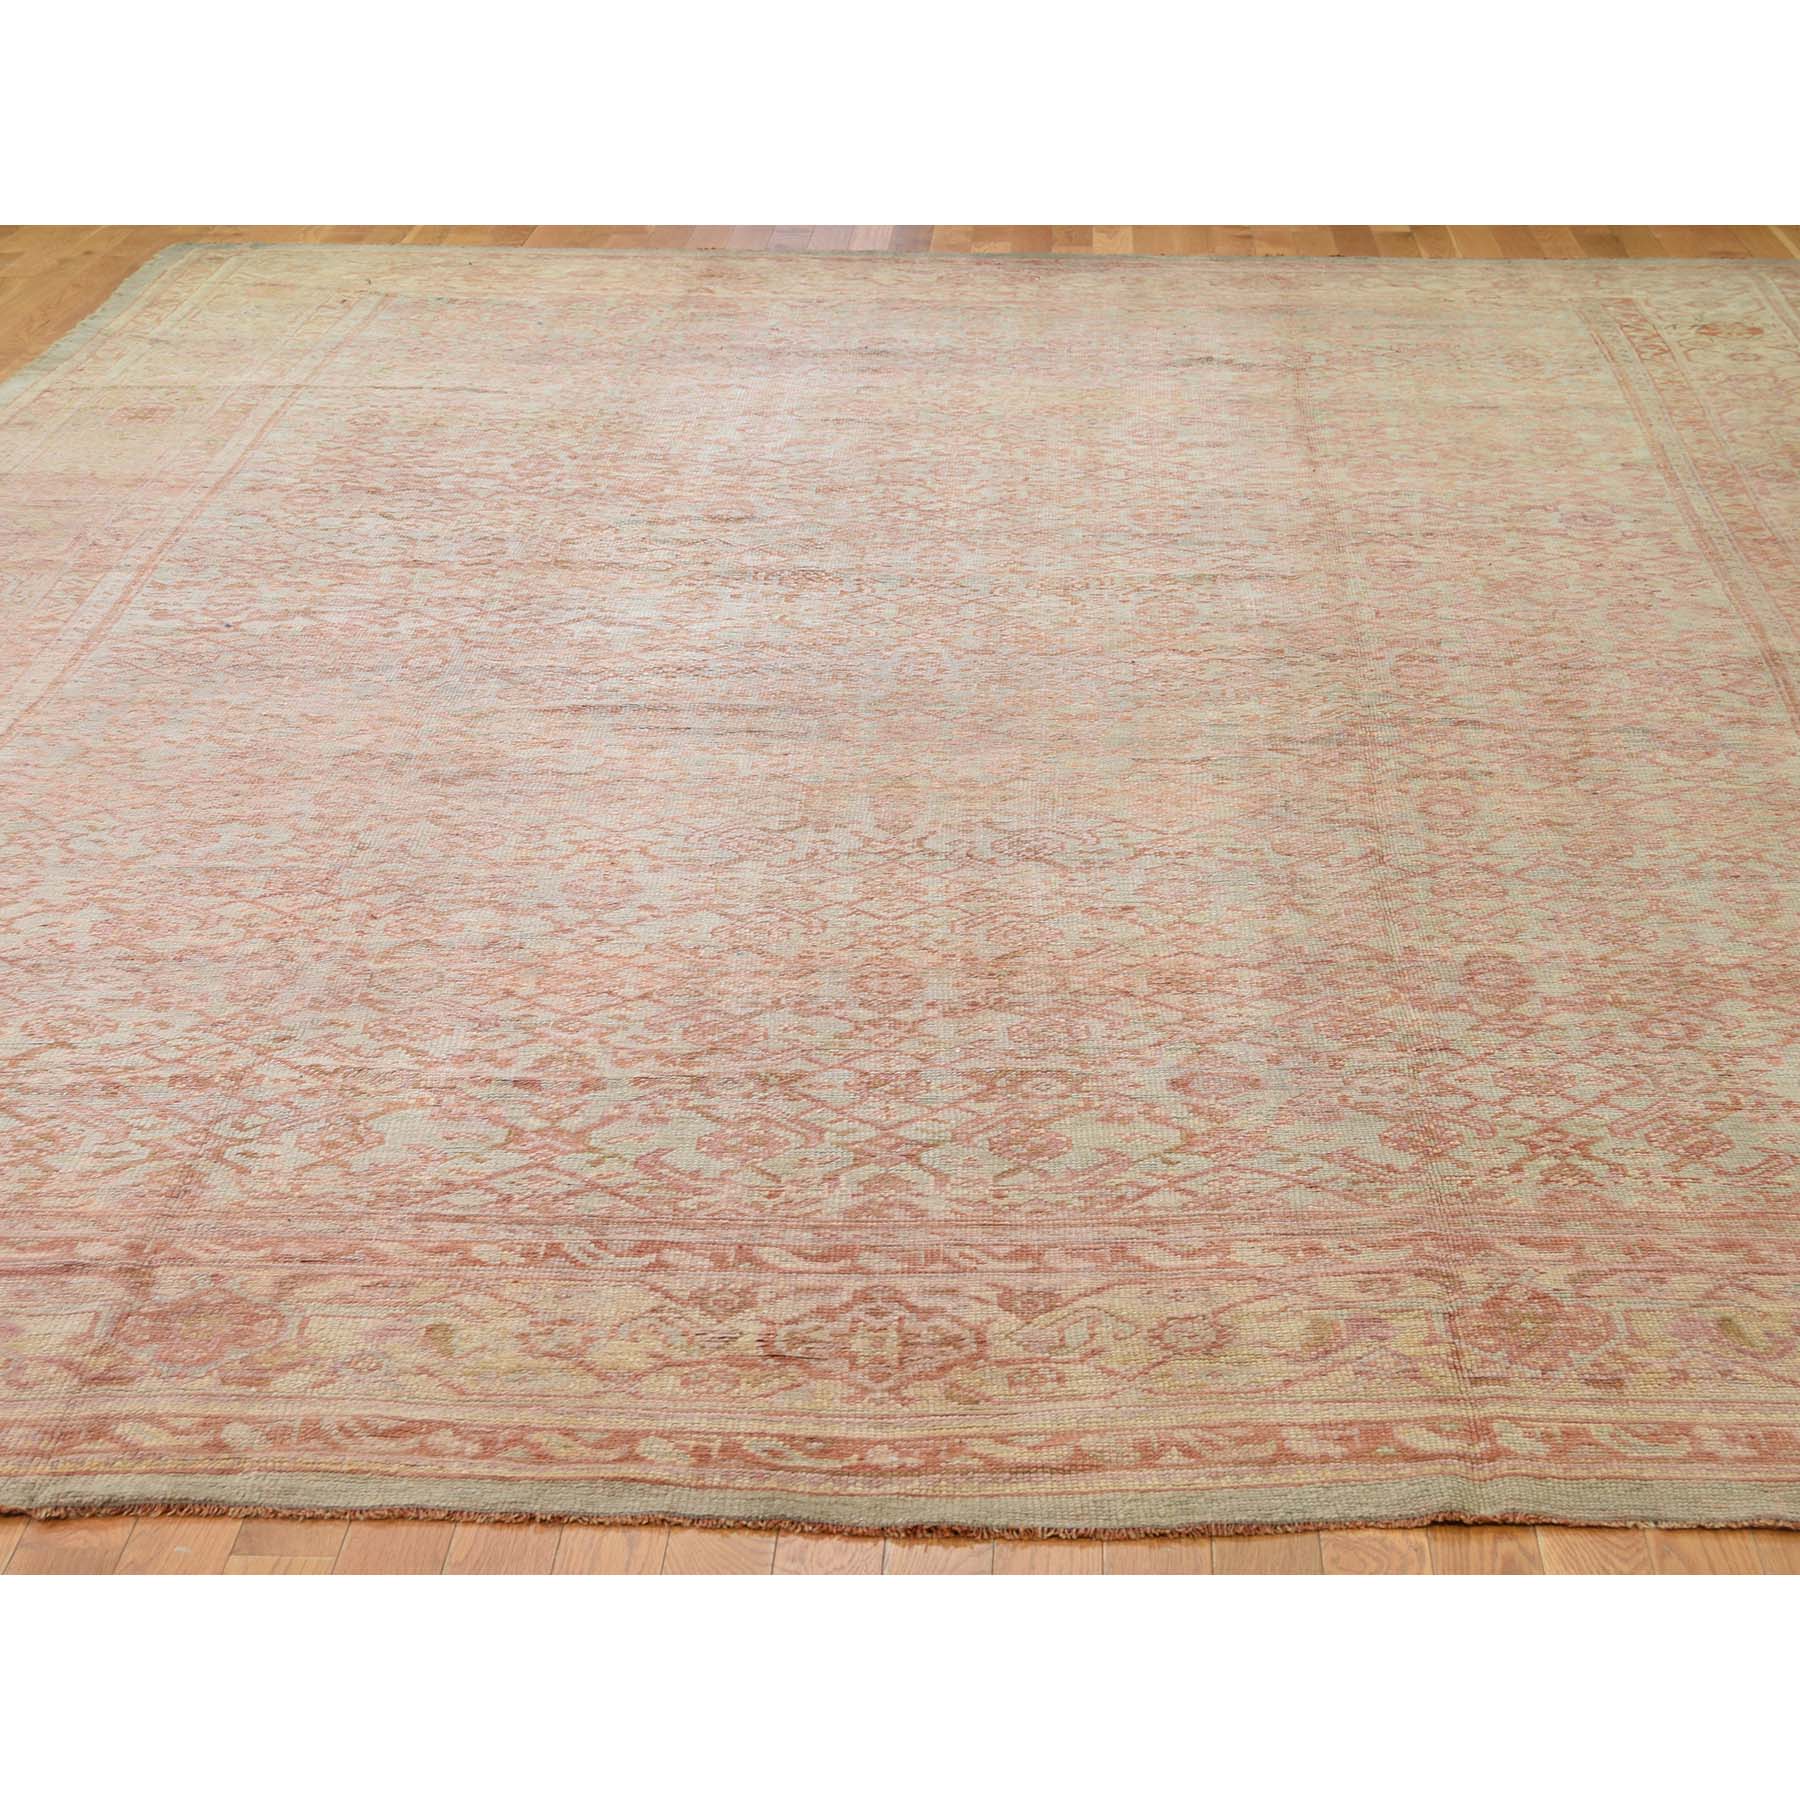 10'10"x15'3" Cinnamon and Green Oversized Antique Turkish Oushak Exc Condition Pure Wool Hand Woven Oriental Rug 